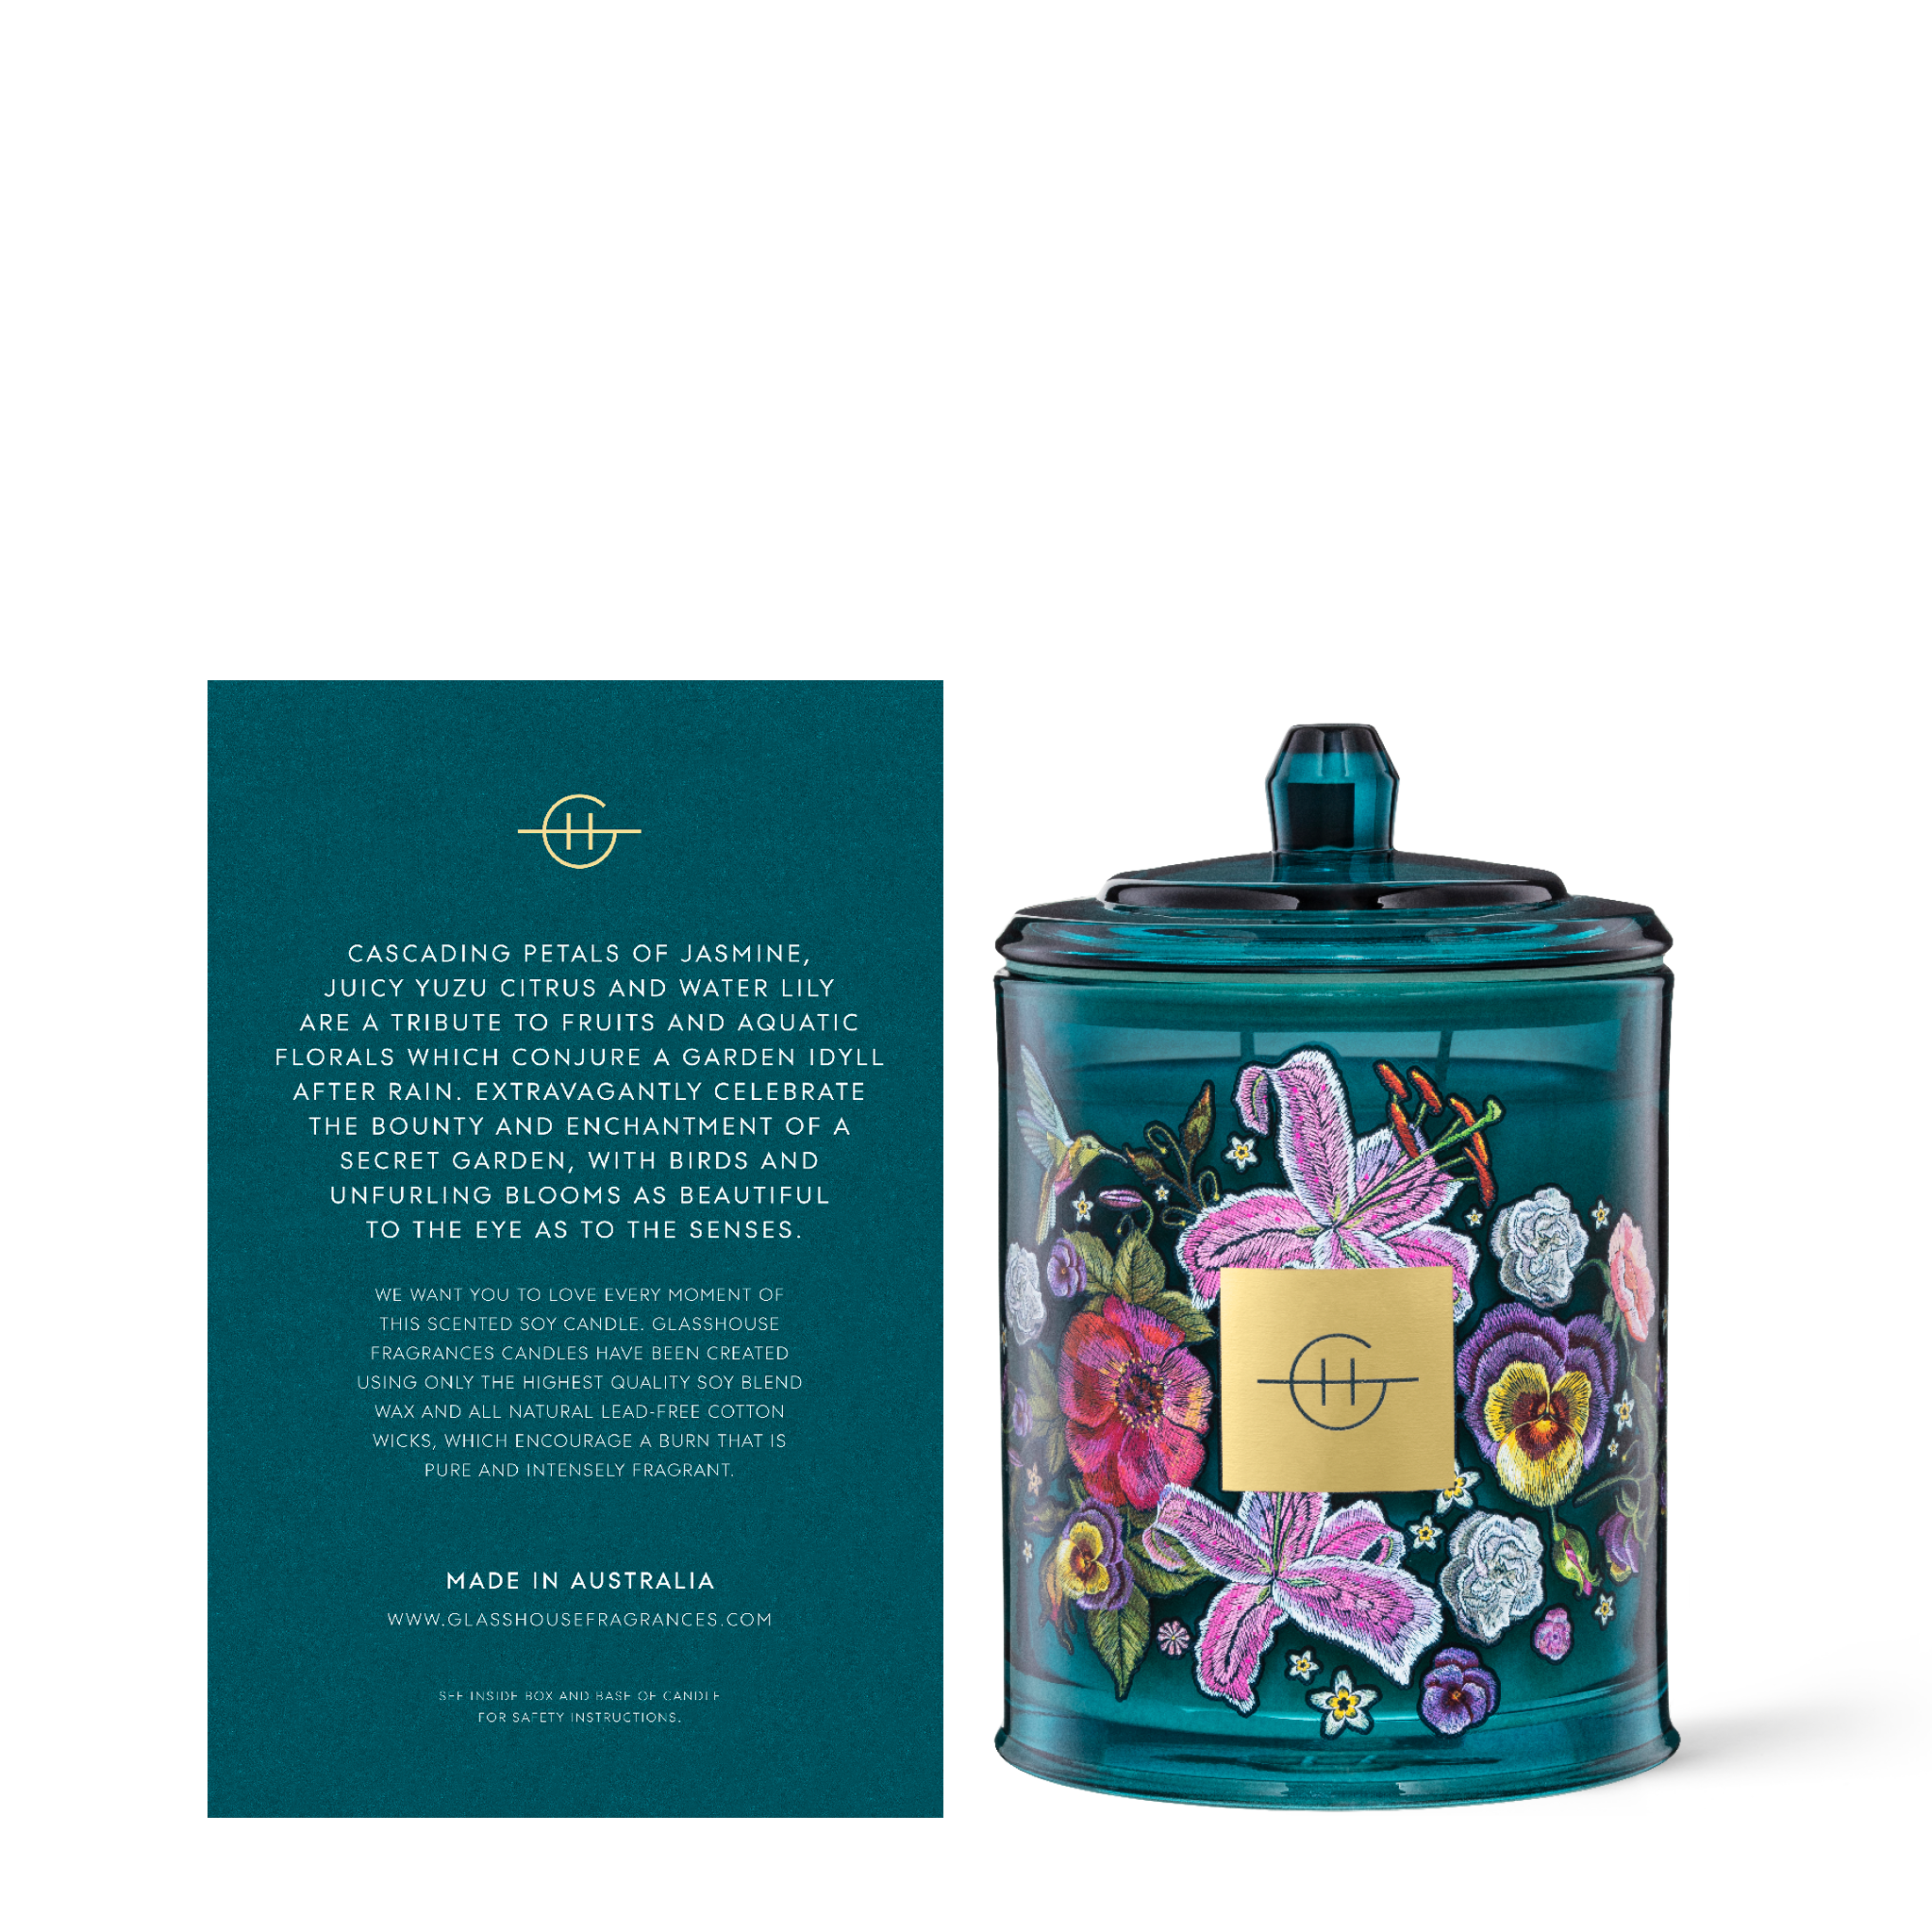 Glasshouse Fragrances Velvet Rhapsody Water Lily & Yuzu 380g Soy Candle with box - Back of product shot